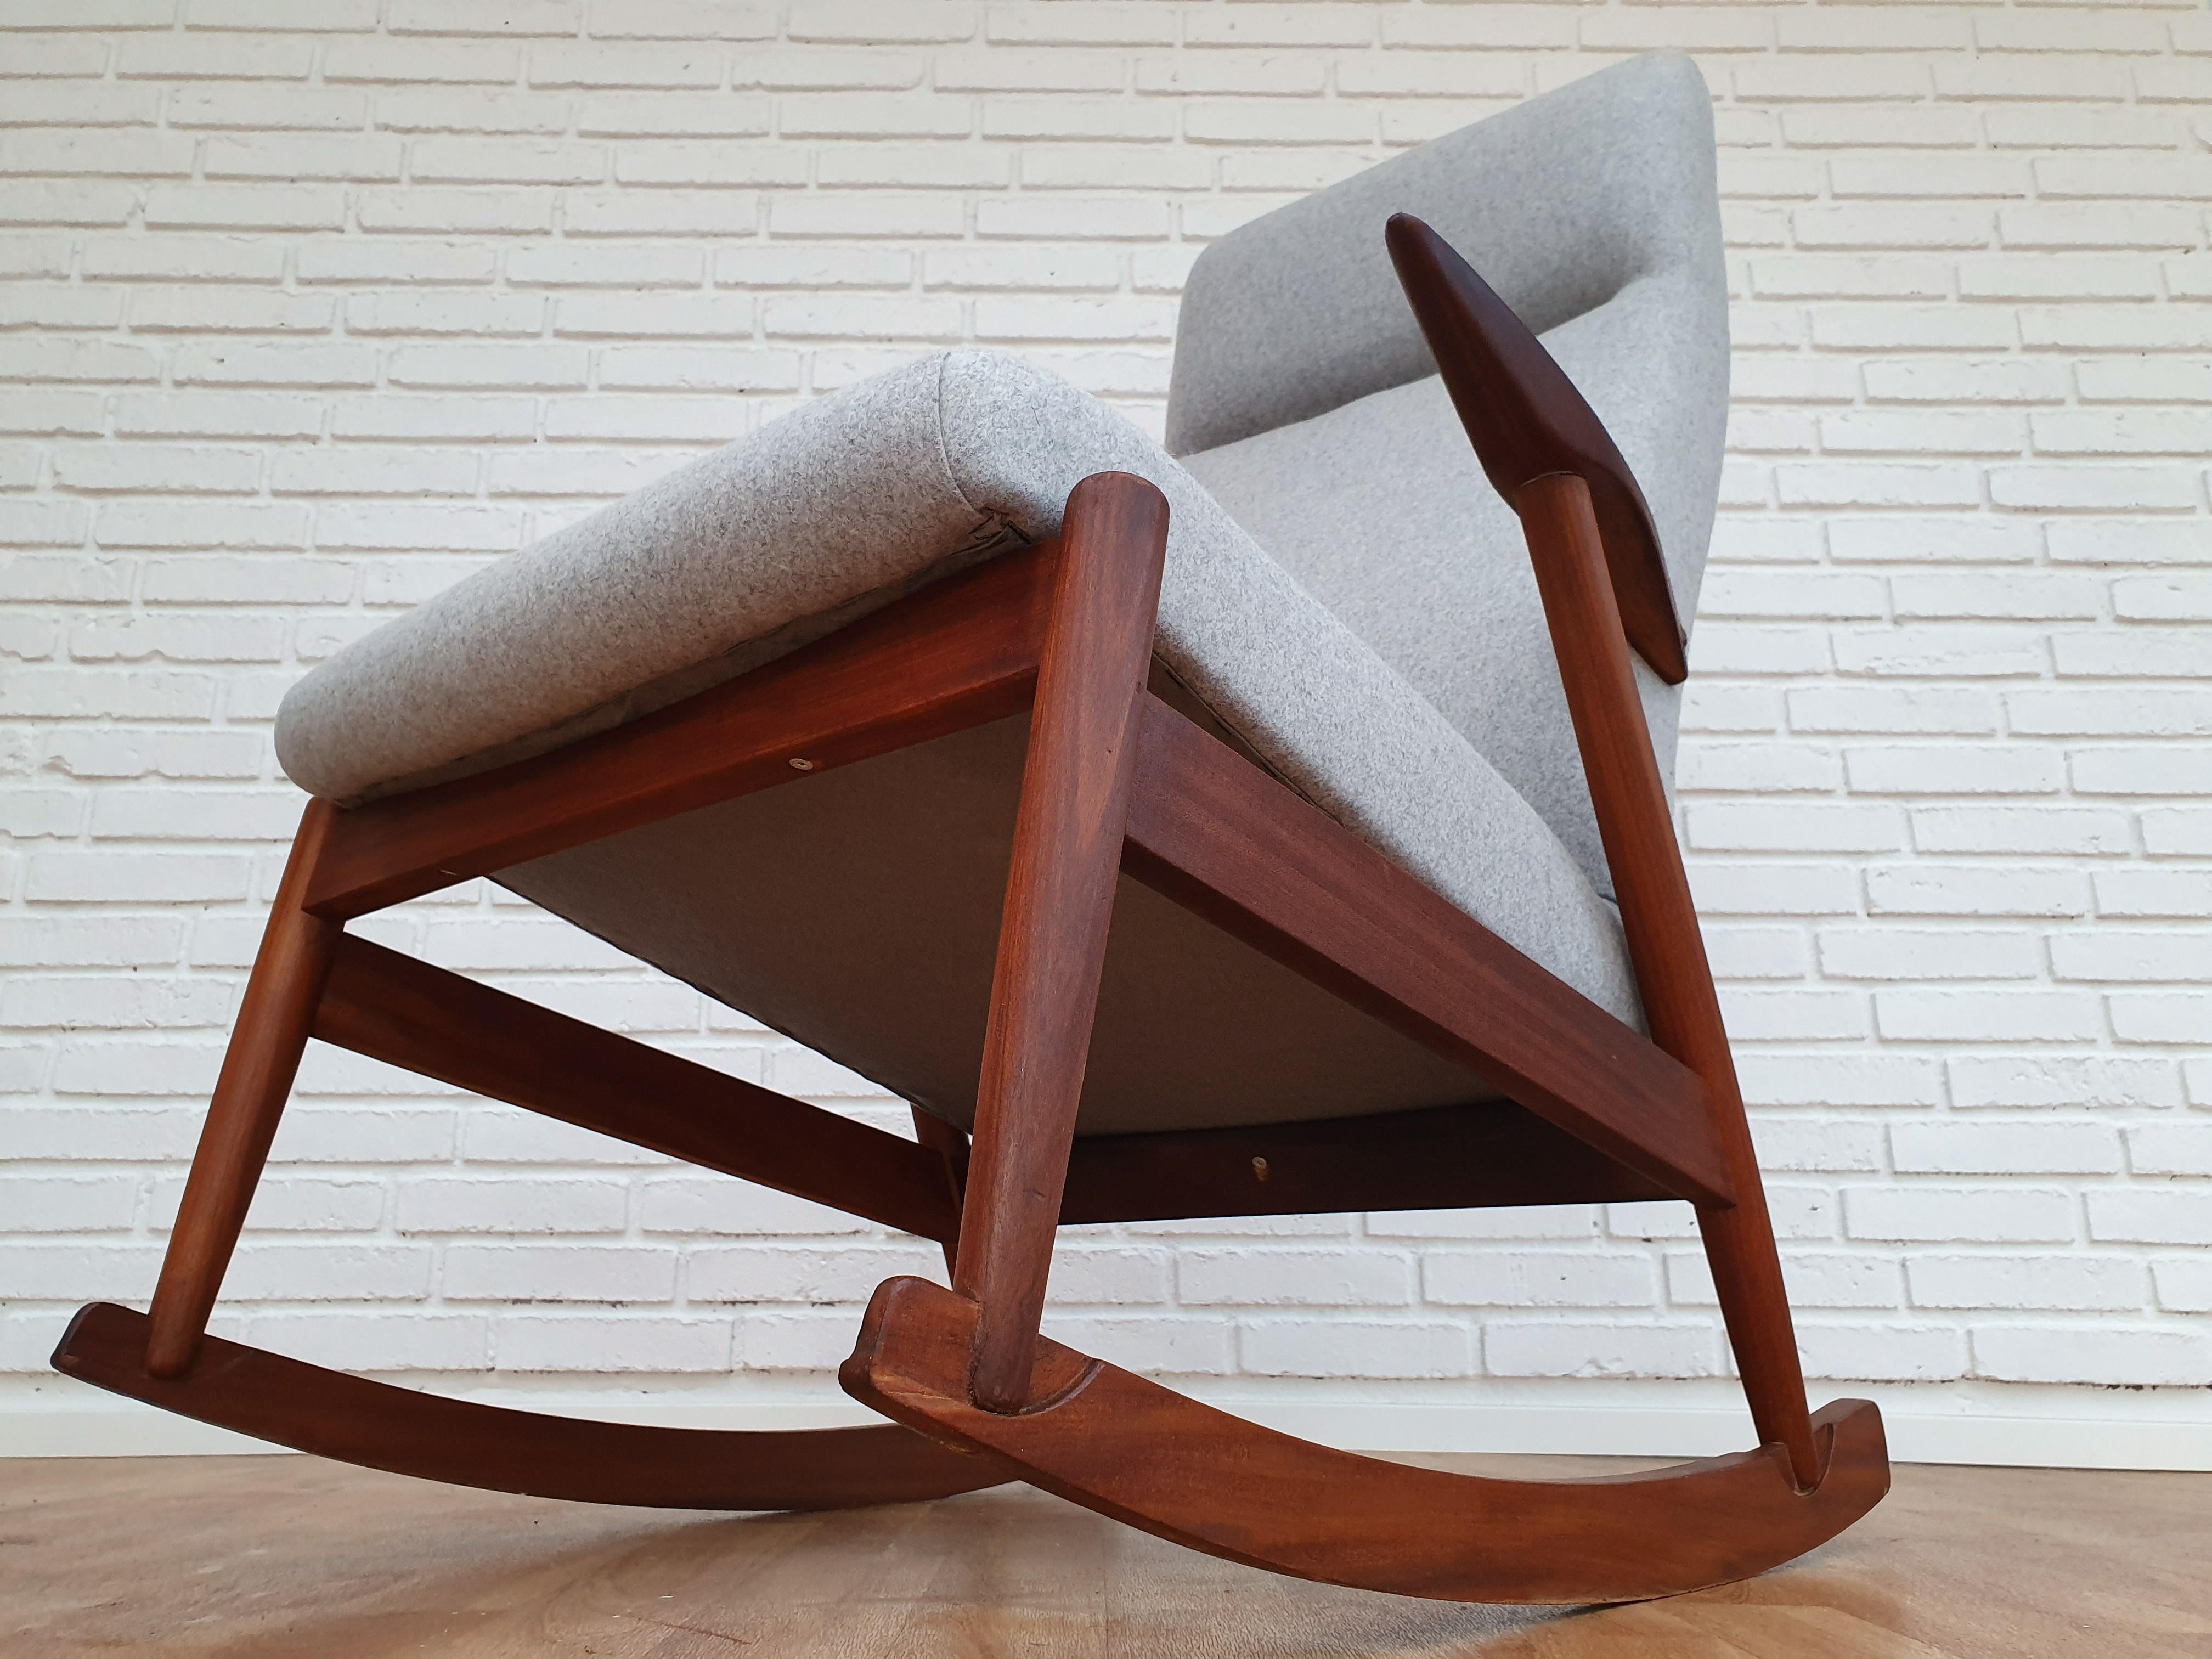 Wool Scandinavian Rocking Chair, Teak Wood, 1960s, Completely Renovated For Sale